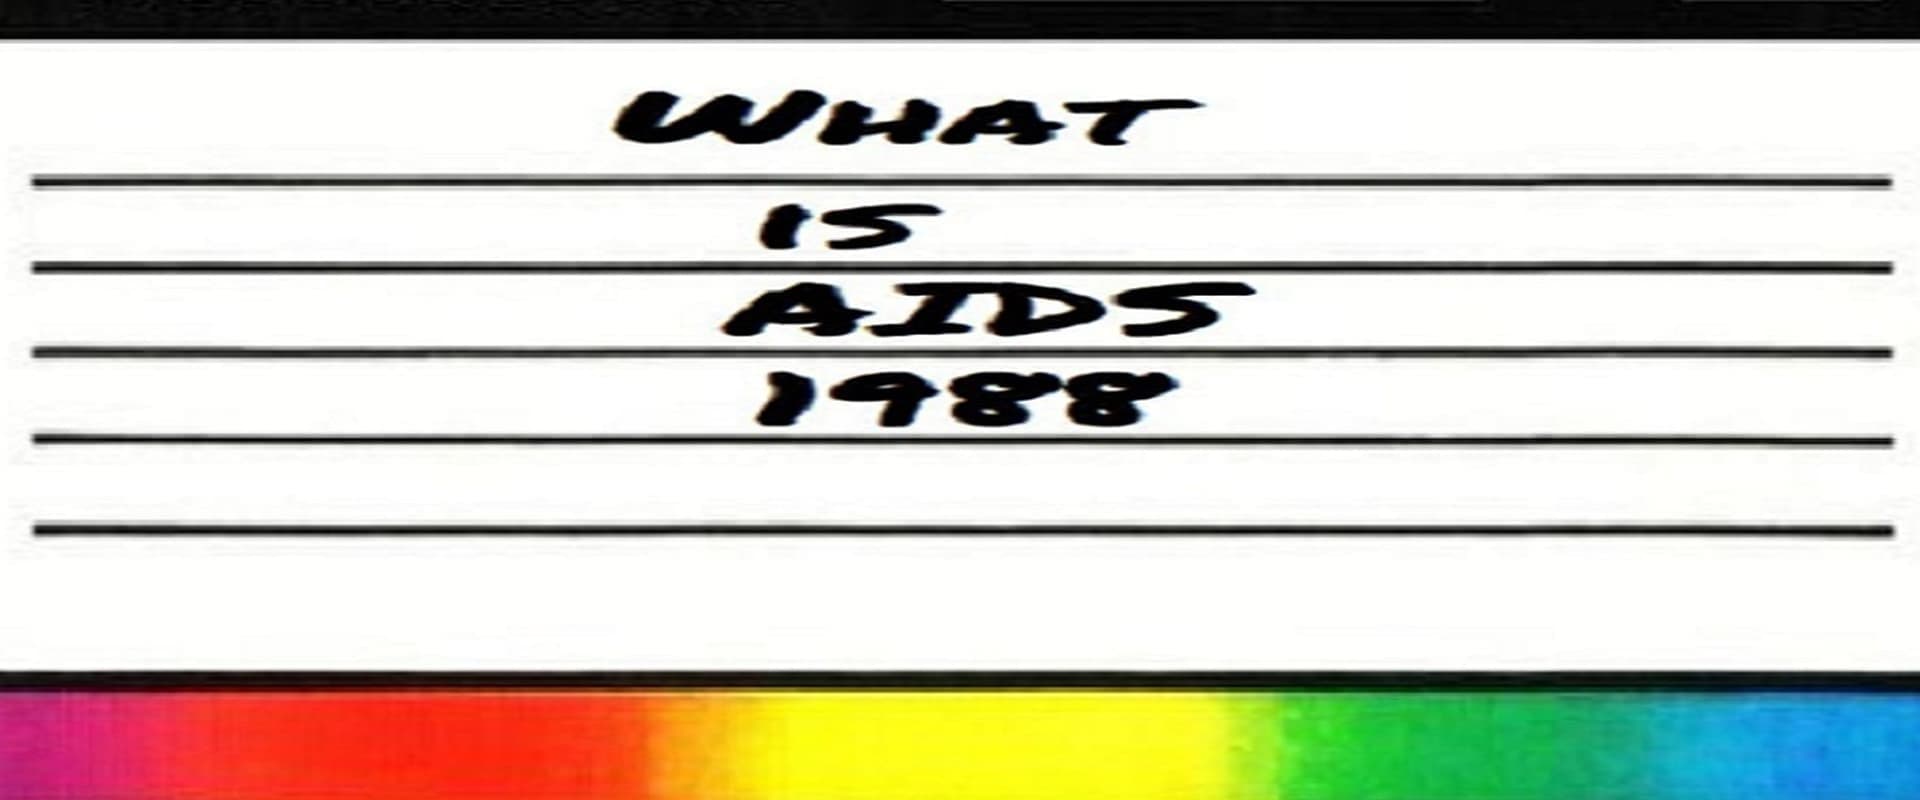 What is AIDS?